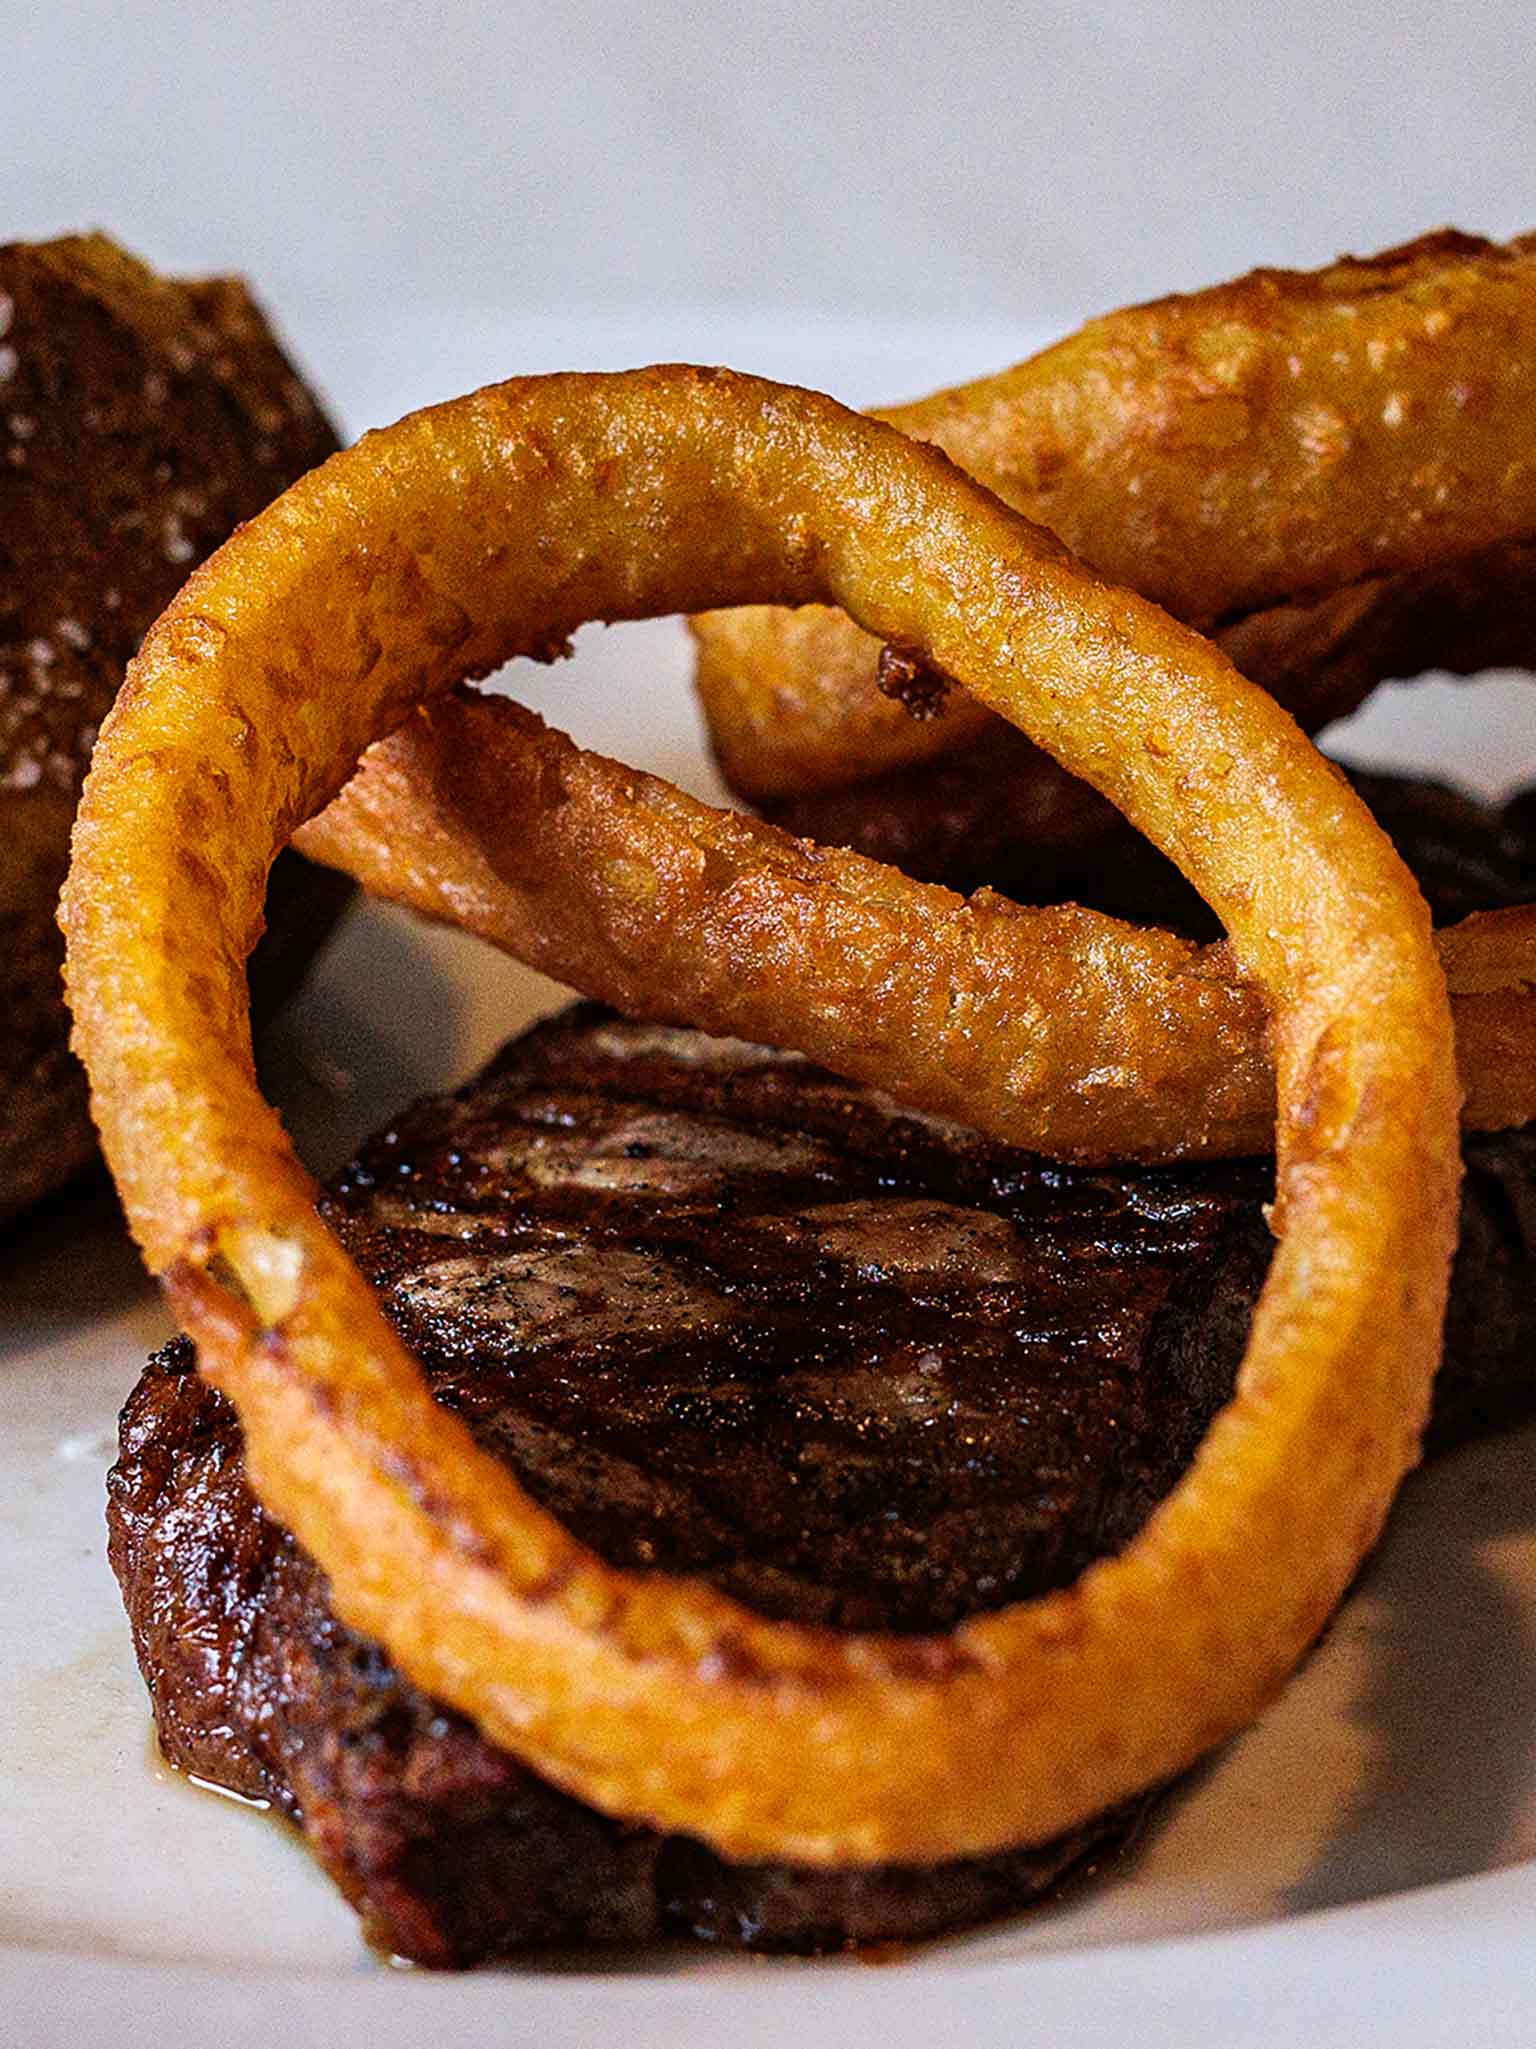 Steak Onion Rings and Baked Potato